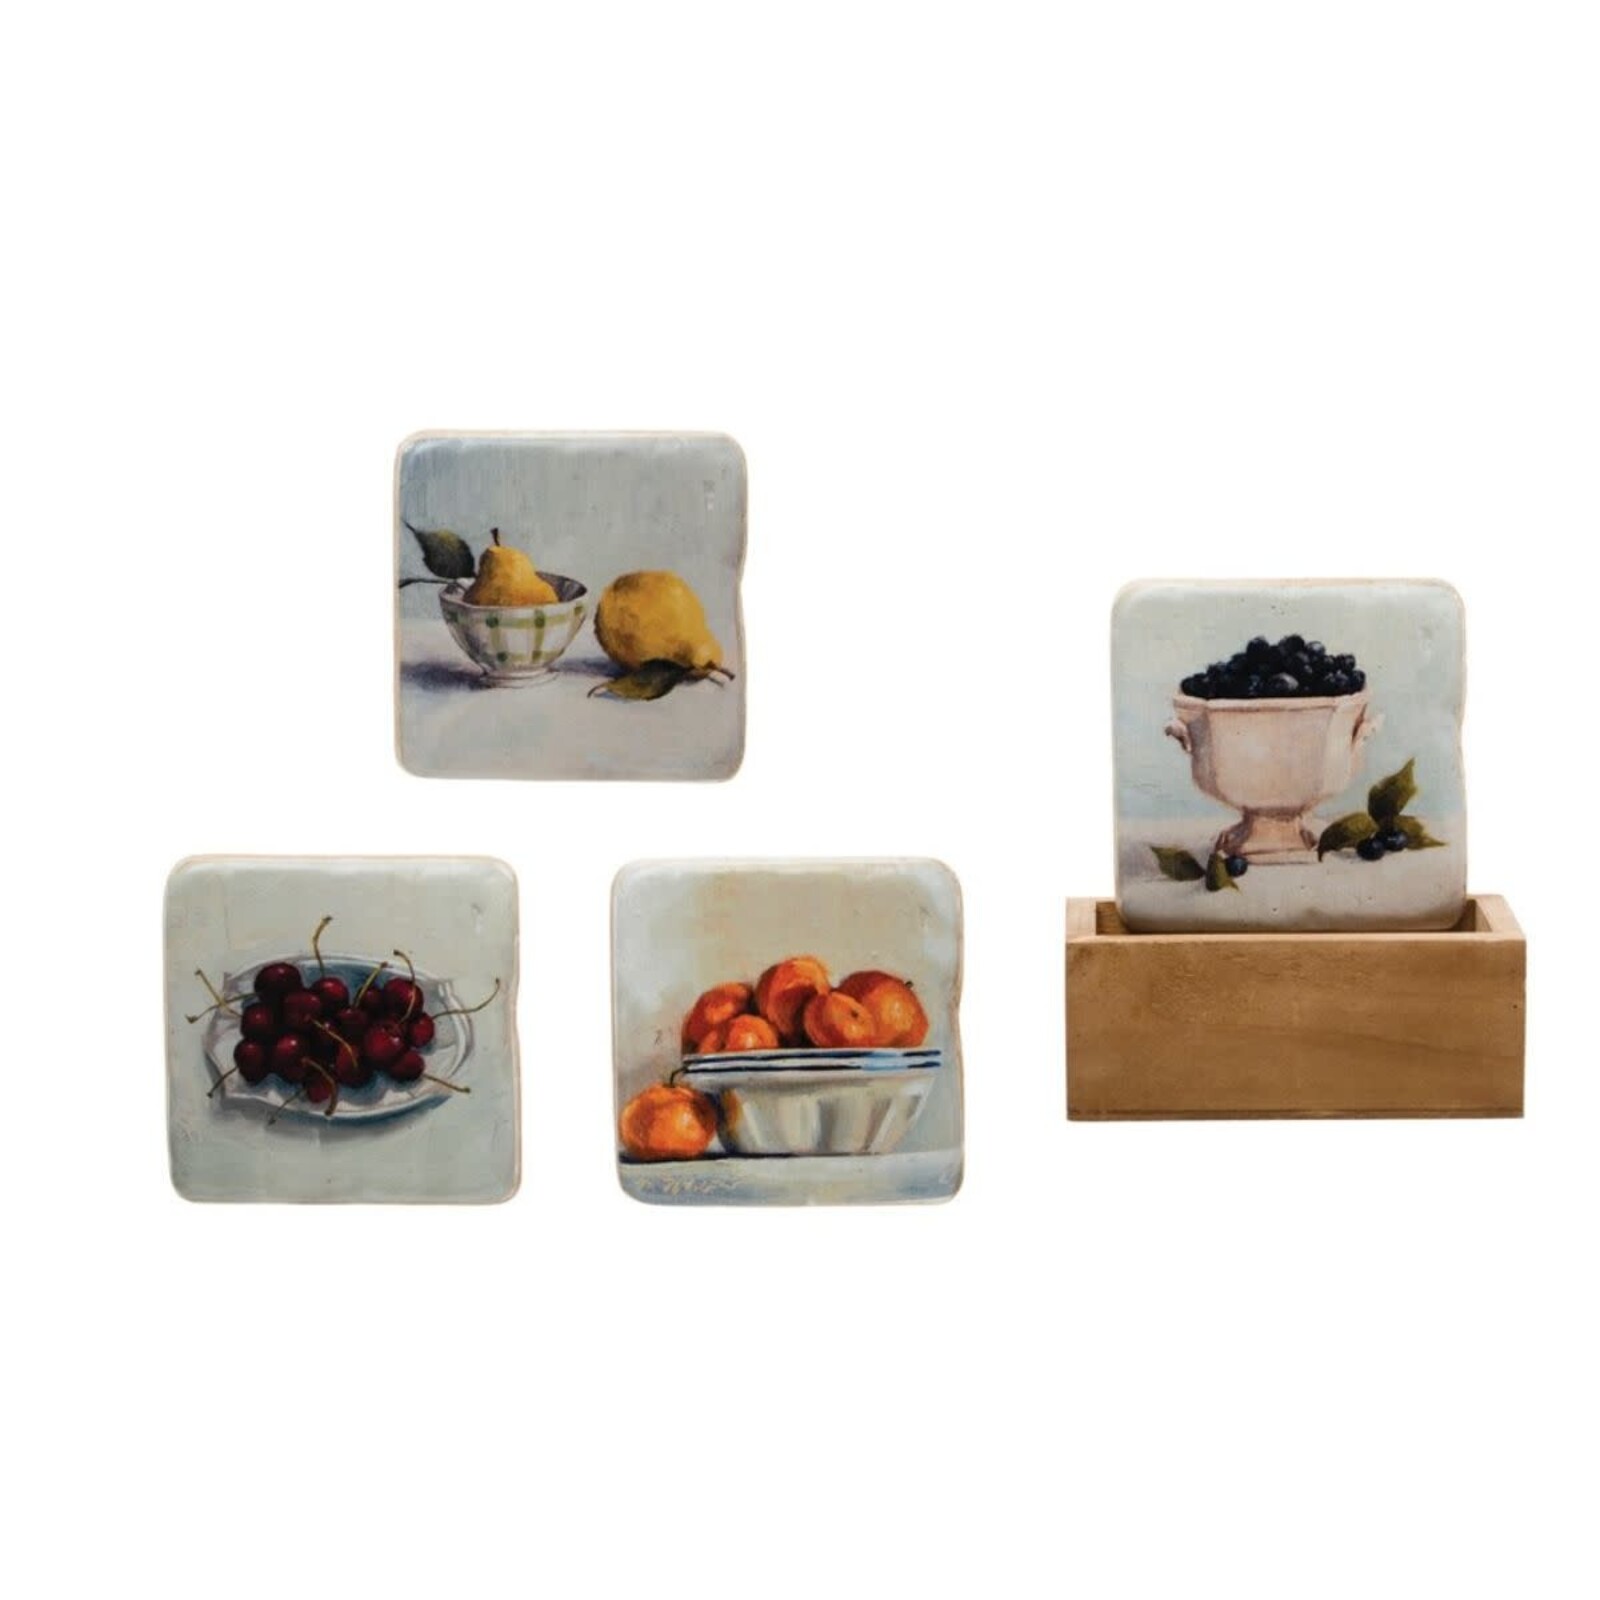 Creative Co-Op 3.75" Square Resin Coasters in Wood Box with Fruit, Set of 5   DF3401 loading=